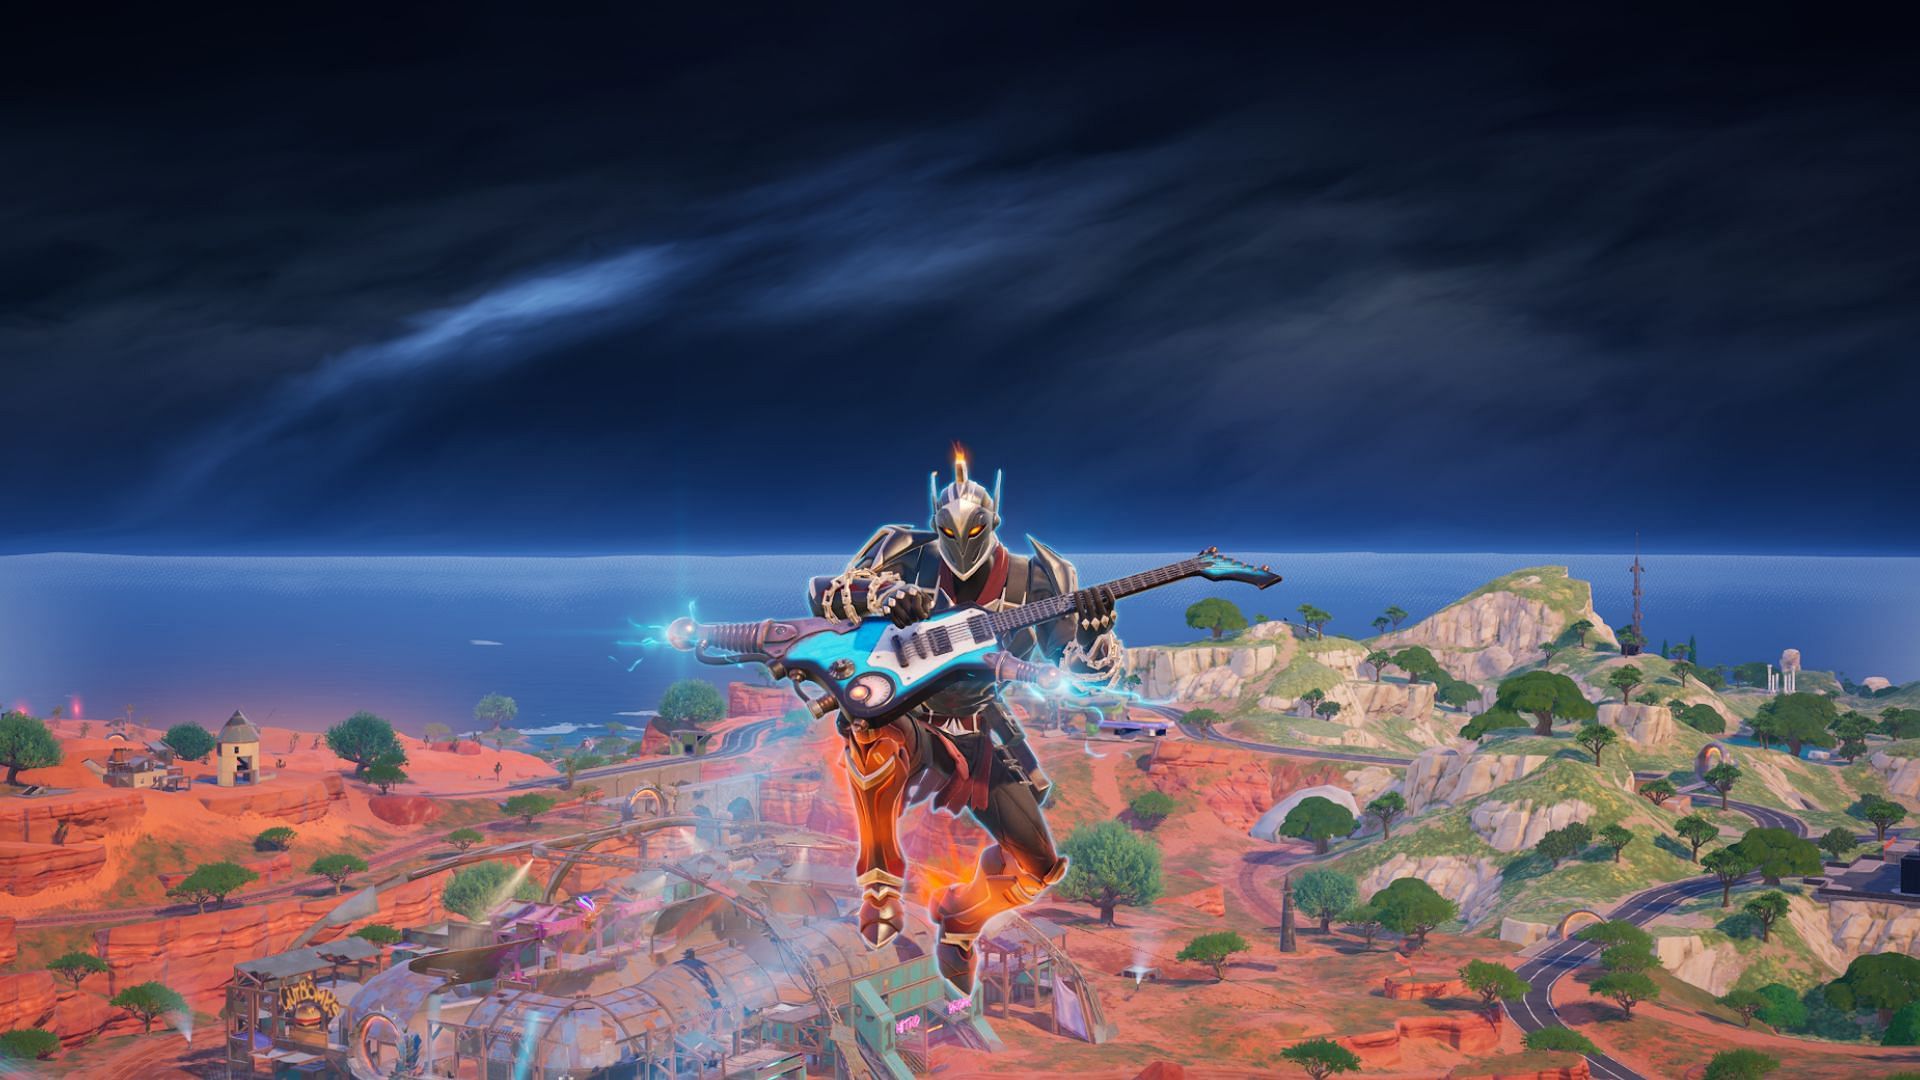 &ldquo;Such a satisfying win&rdquo;: Fortnite community reacts to player&rsquo;s Chapter 5 Season 3 win with the Ride the Lightning Mythic